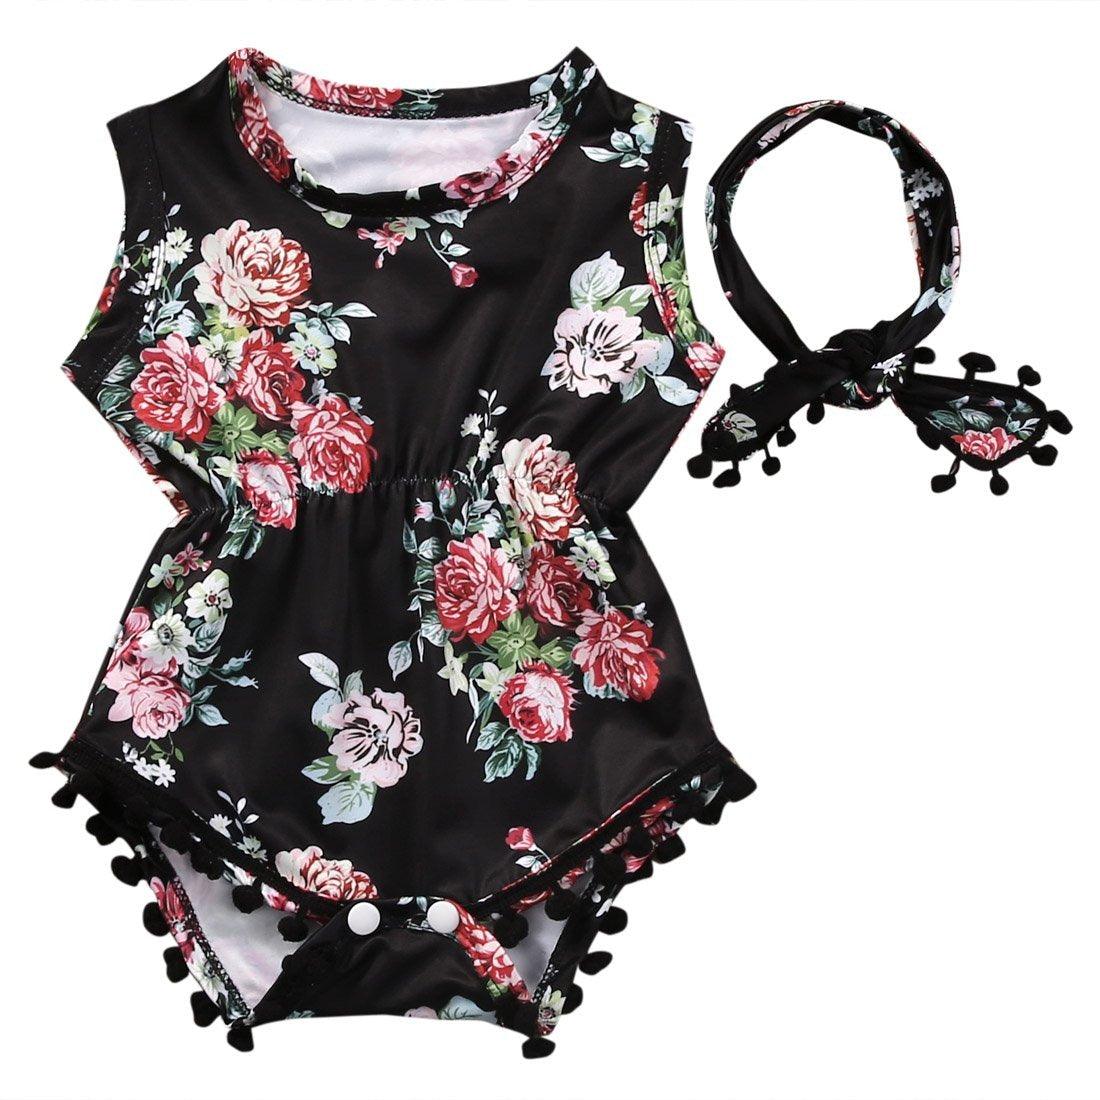 Baby Girl Romper Floral Bodysuit Headband Outfit